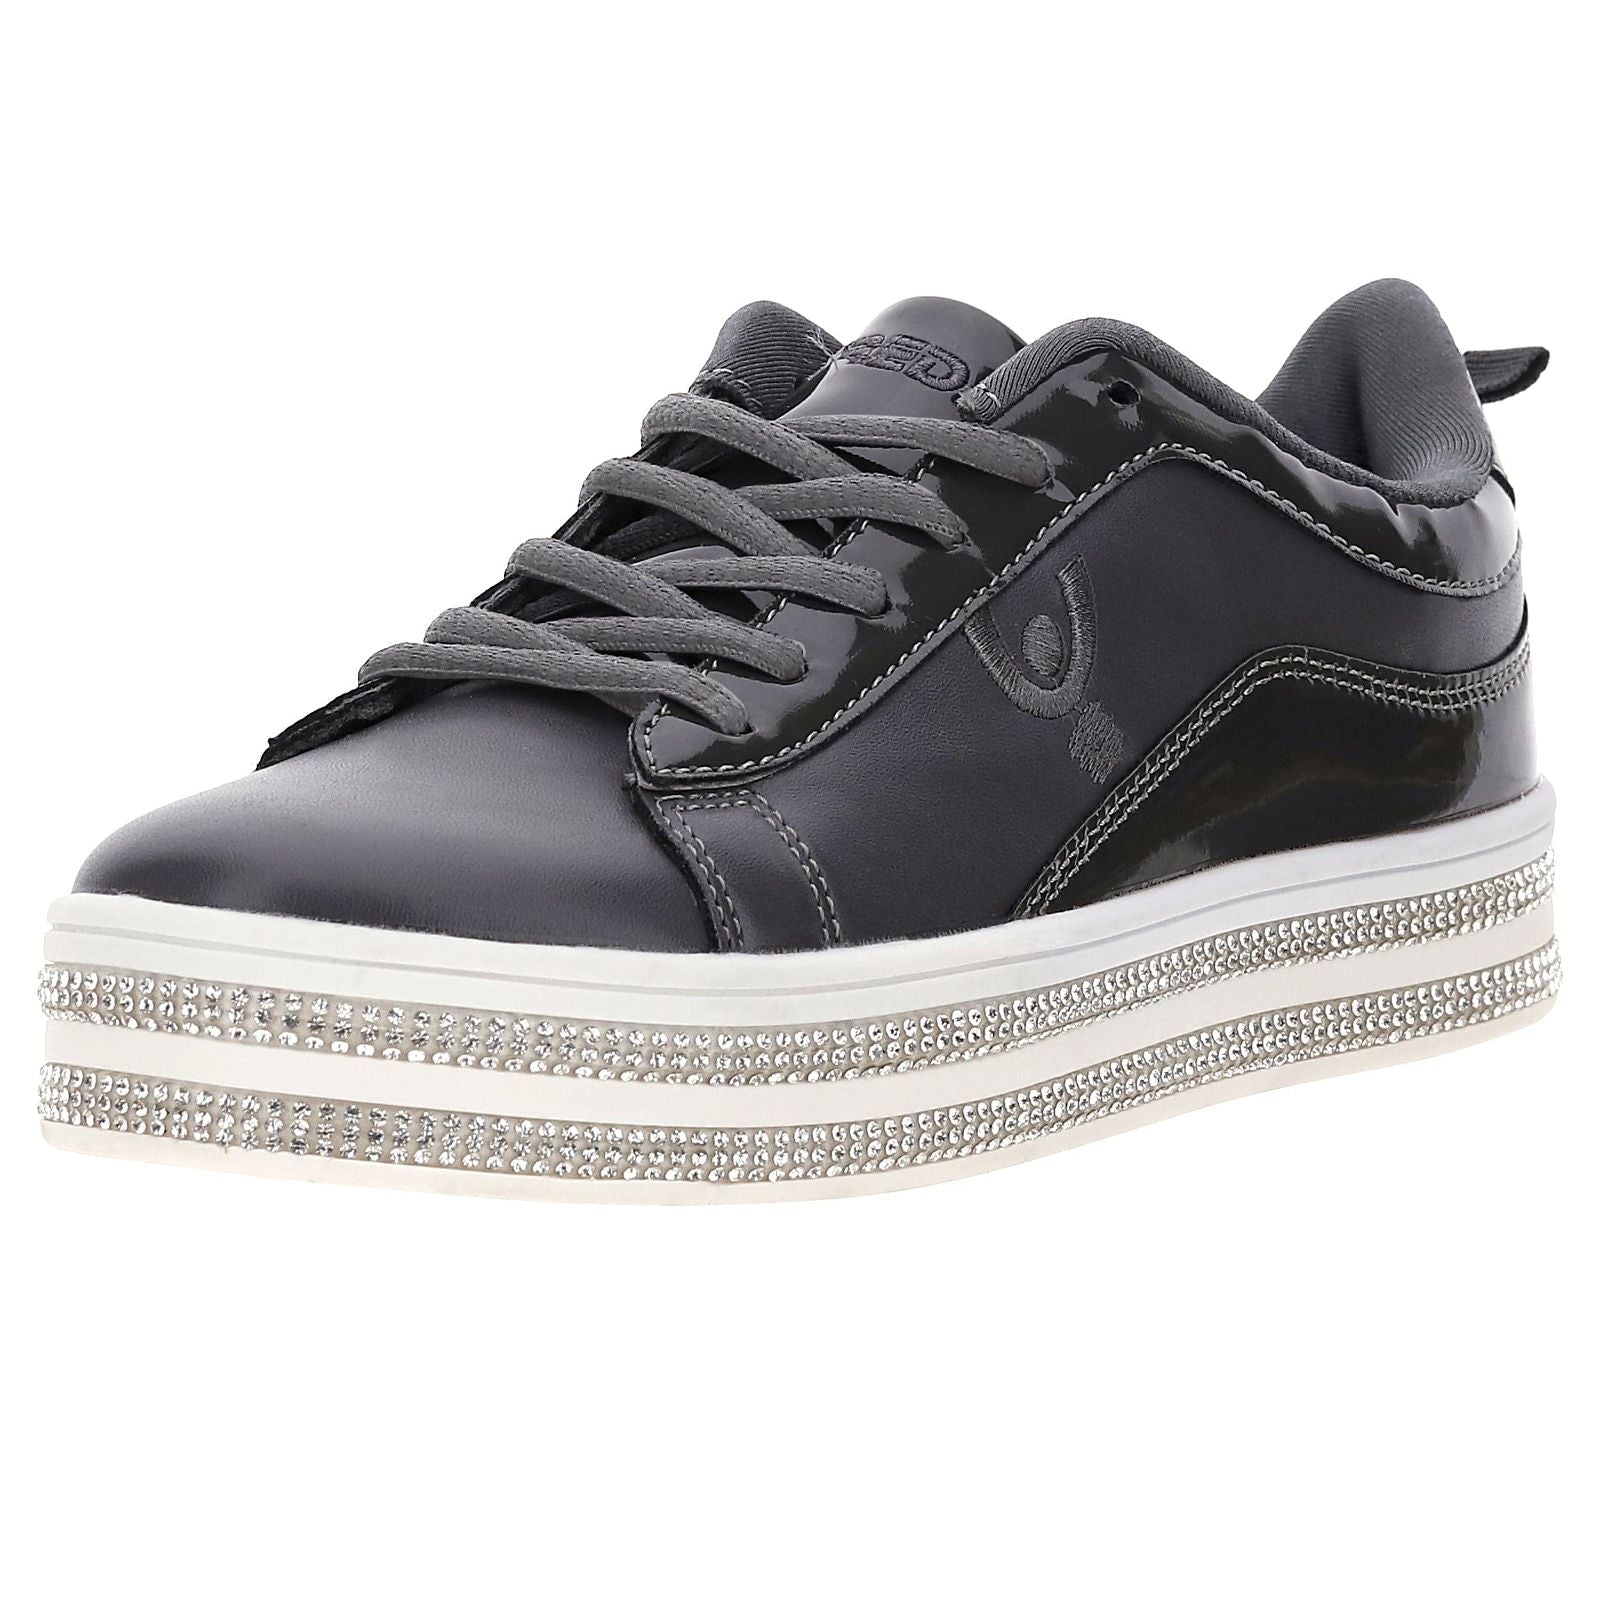 Women's Faux Leather Trainers - Lead 1